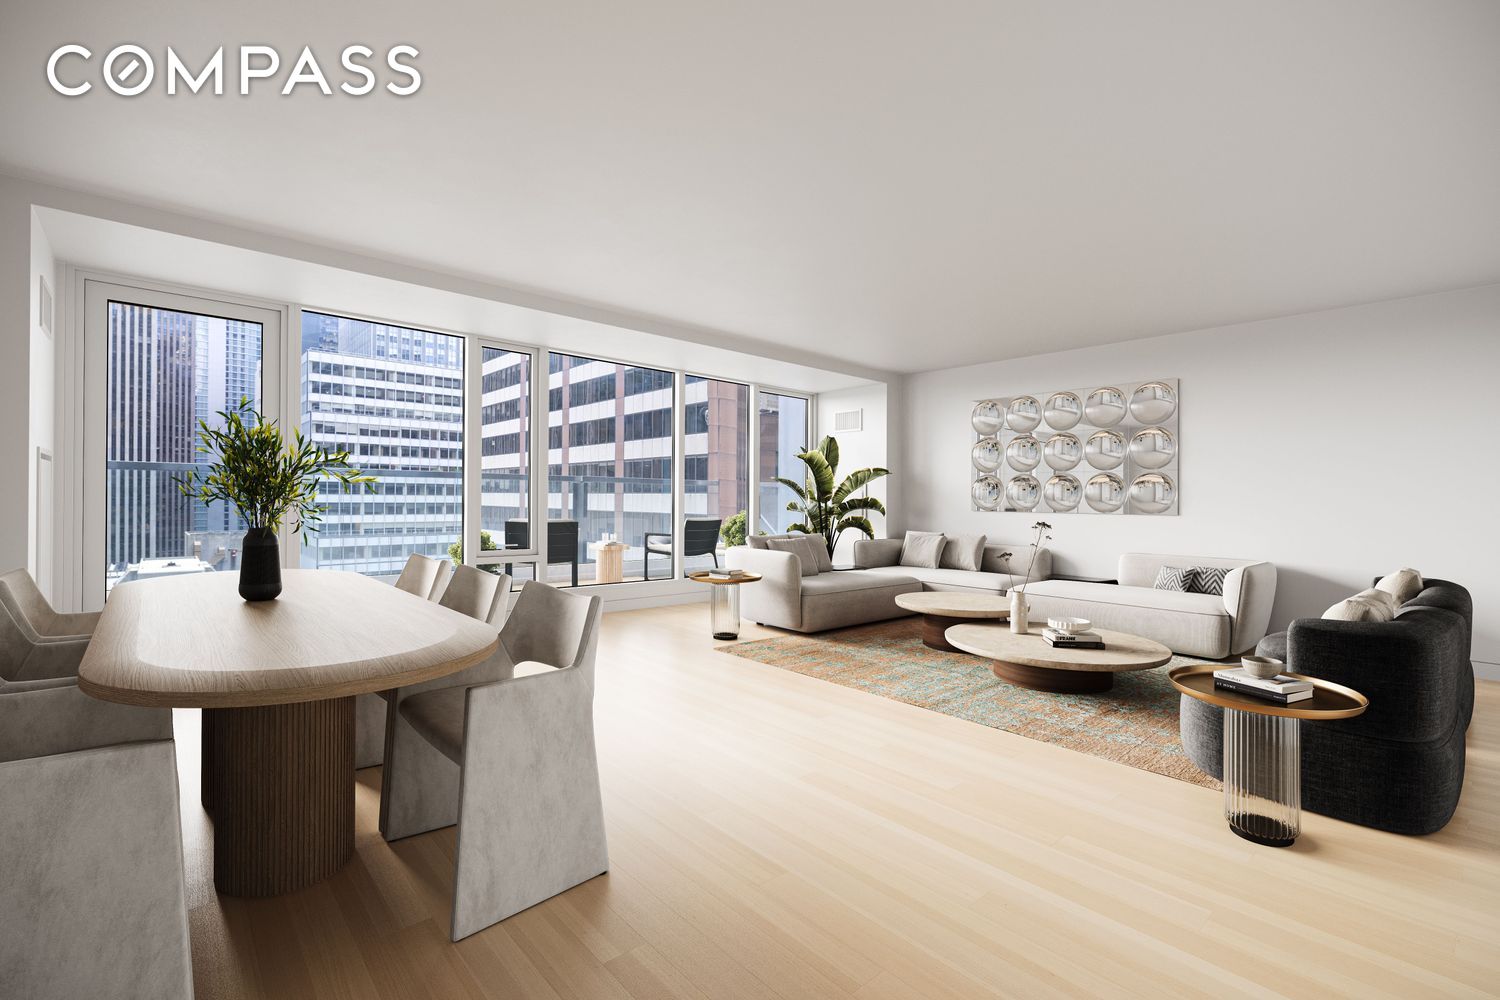 135 West 52nd Street 17B, Theater District, Midtown West, NYC - 2 Bedrooms  
2.5 Bathrooms  
6 Rooms - 